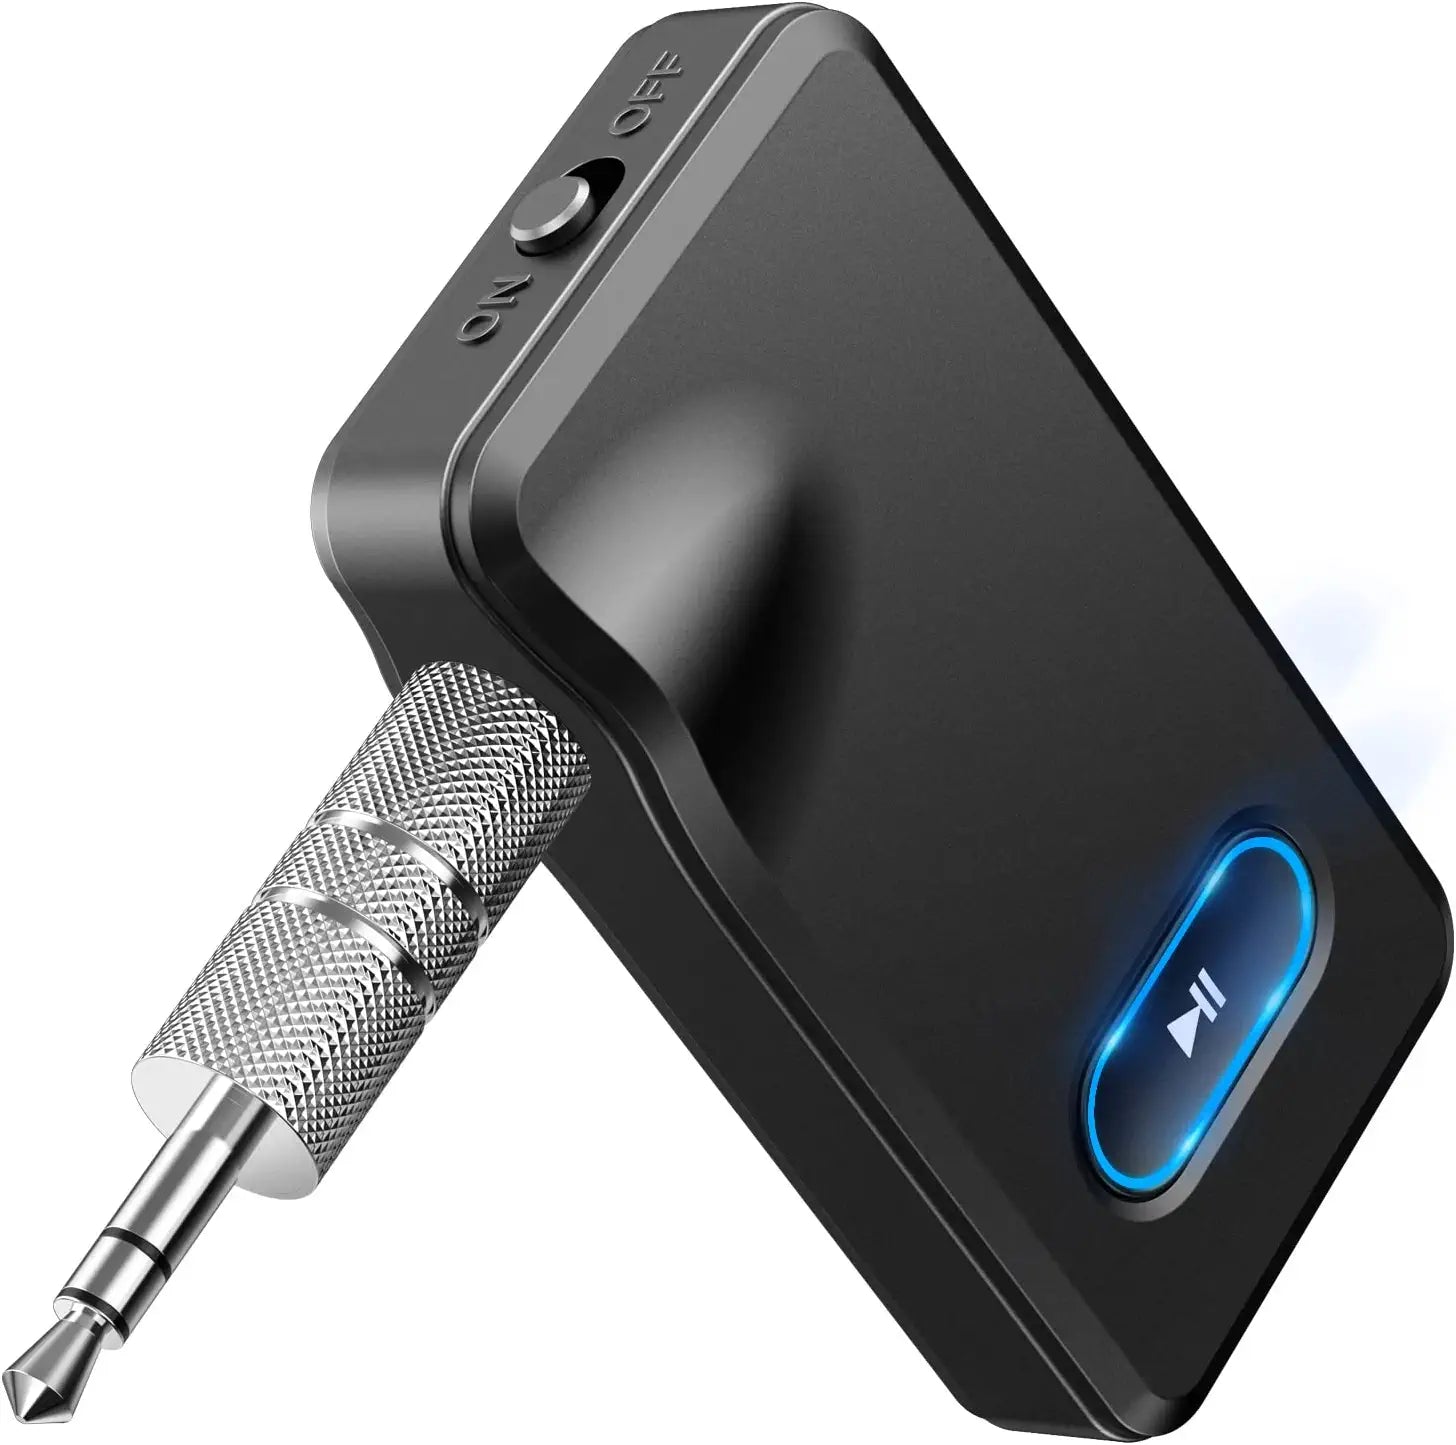 bluetooth receiver aux car charger